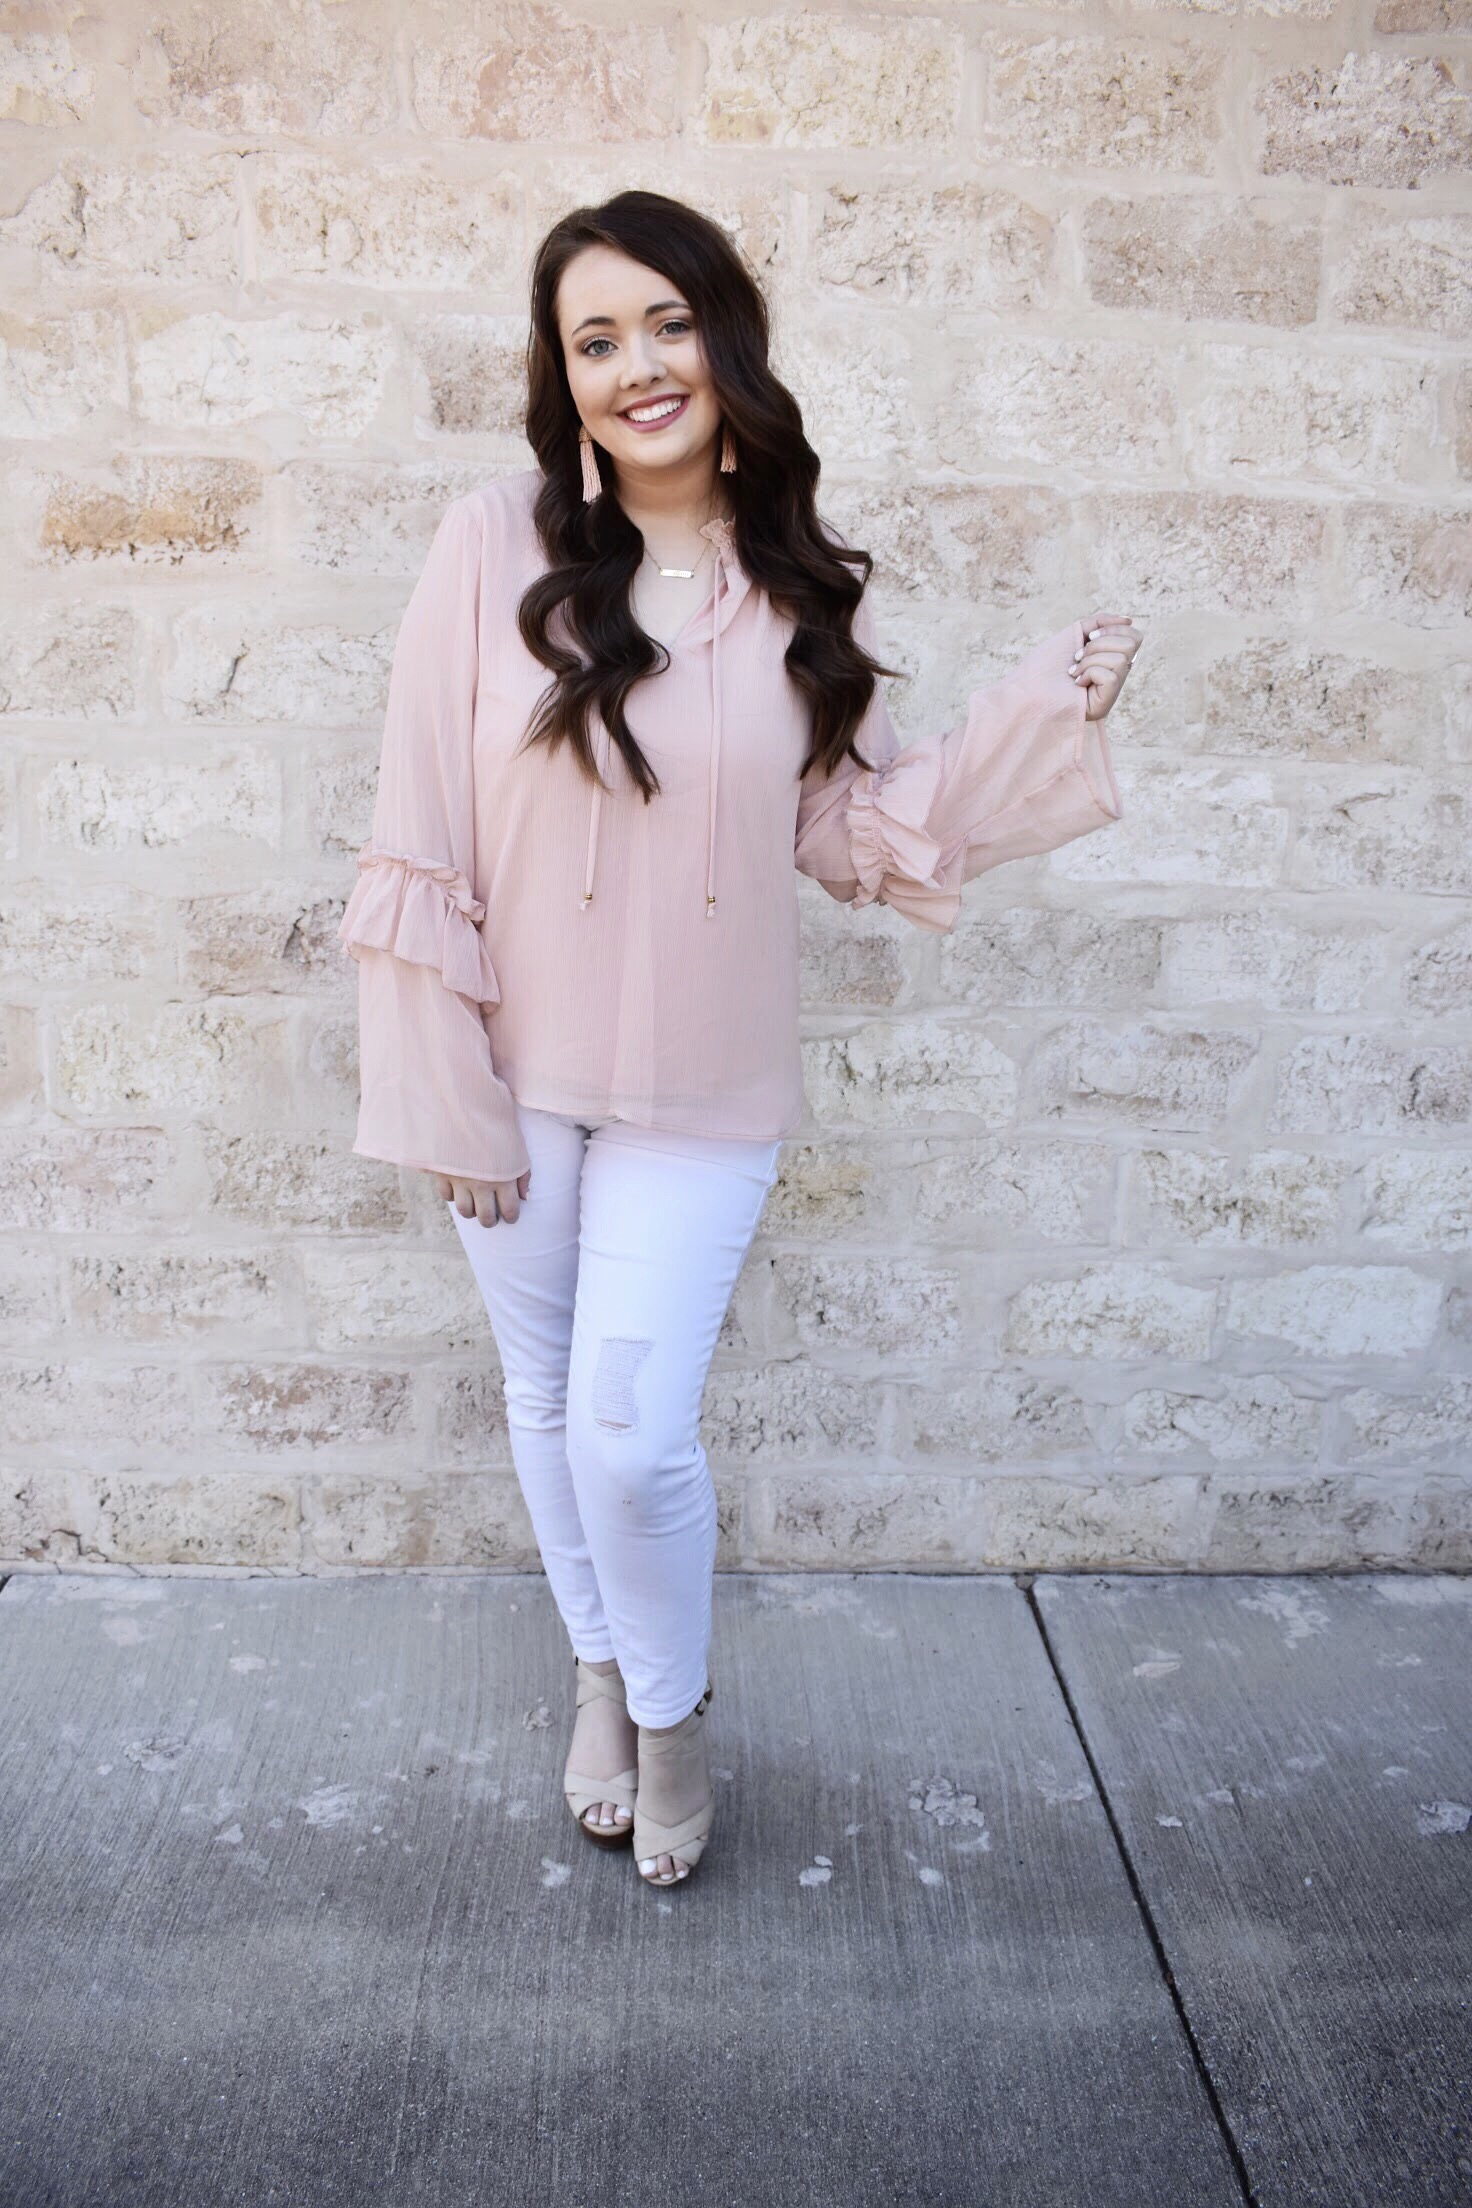 A Semi-Dressy Valentines Day Outfit Idea + Simply Stylish Is 1!